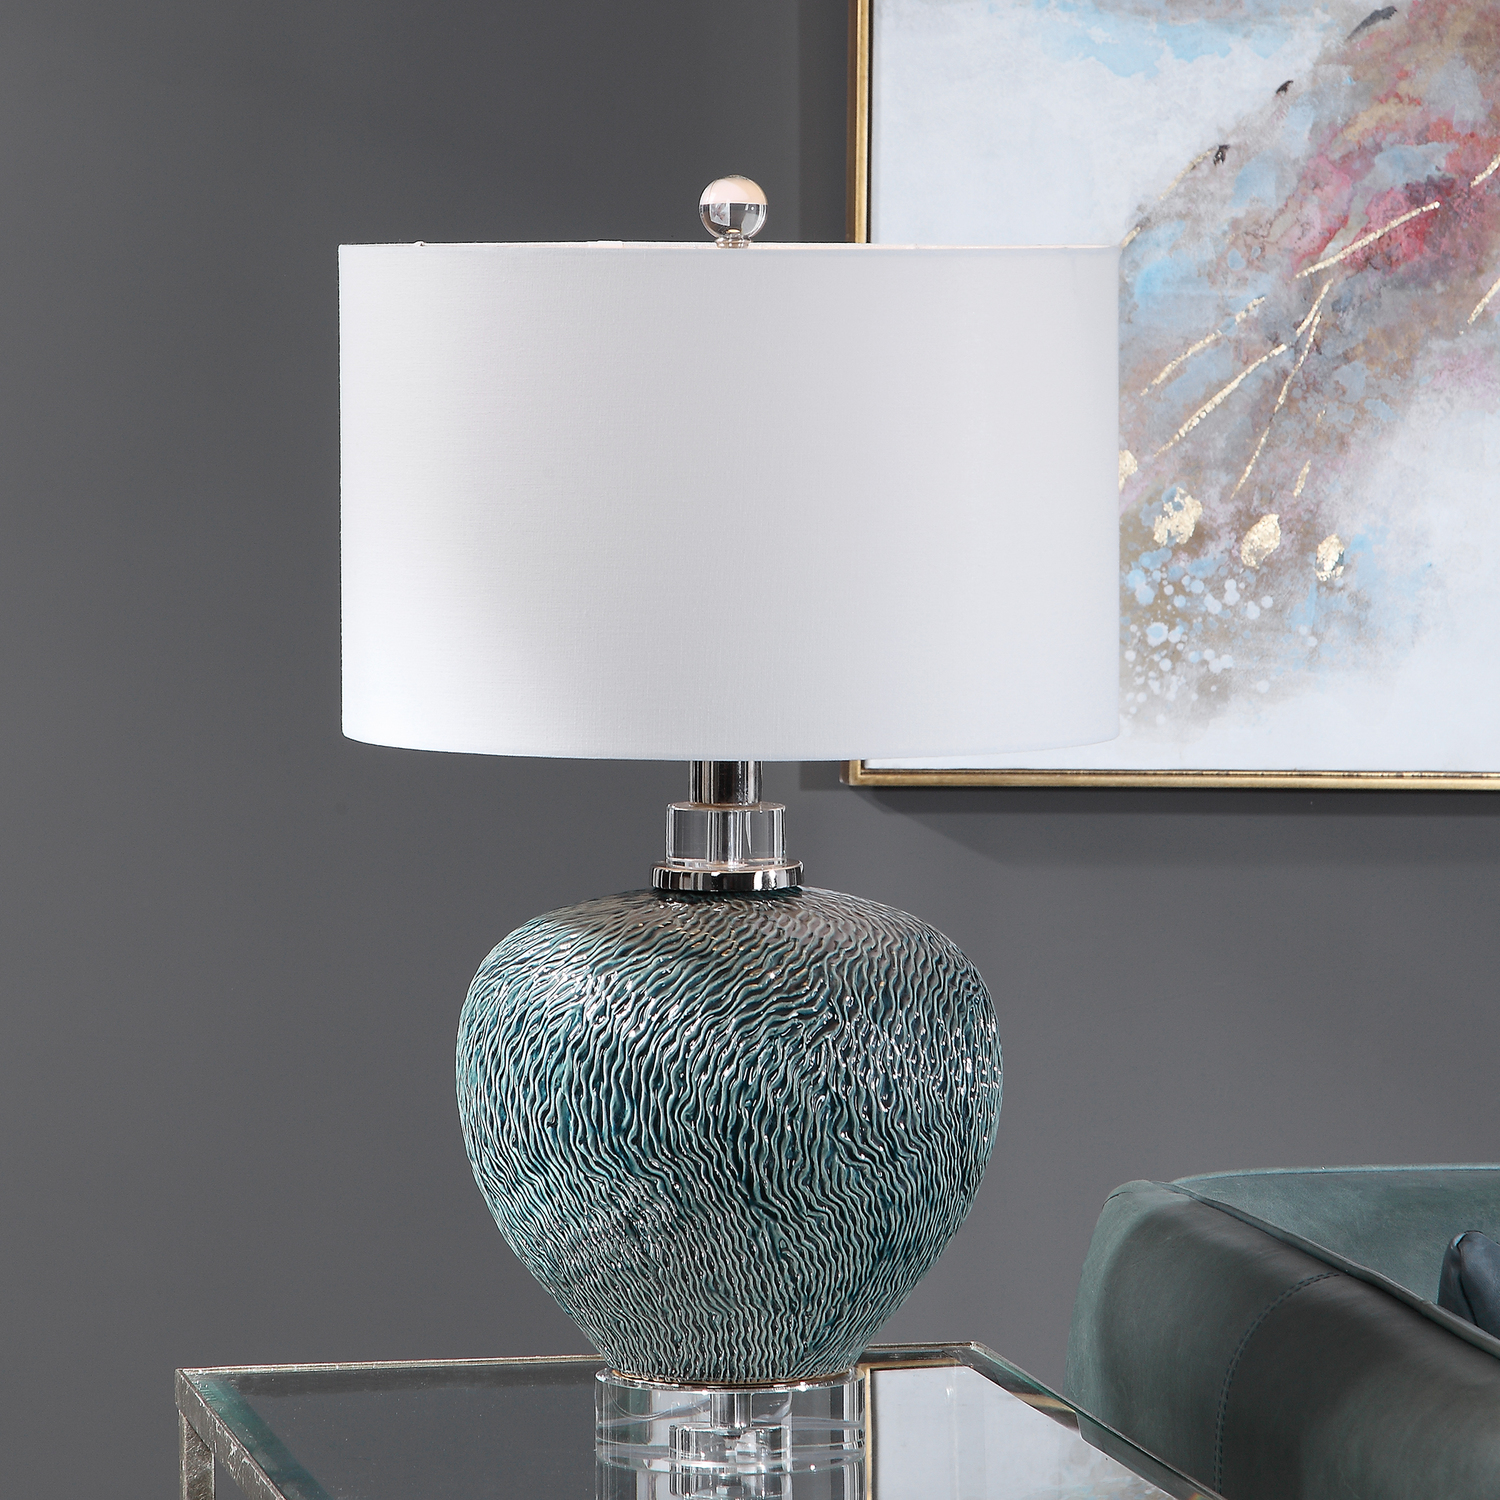 white gold lampshade Uttermost Almera Dark Teal Table Lamp Add A Touch Of Bohemian Flair To A Space With This Unique Table Lamp. The Ceramic Base Features An Organic Textured Base Finished In A Distressed Dark Teal Glaze, Paired With Polished Nickel Accents And Thick Crystal Details.